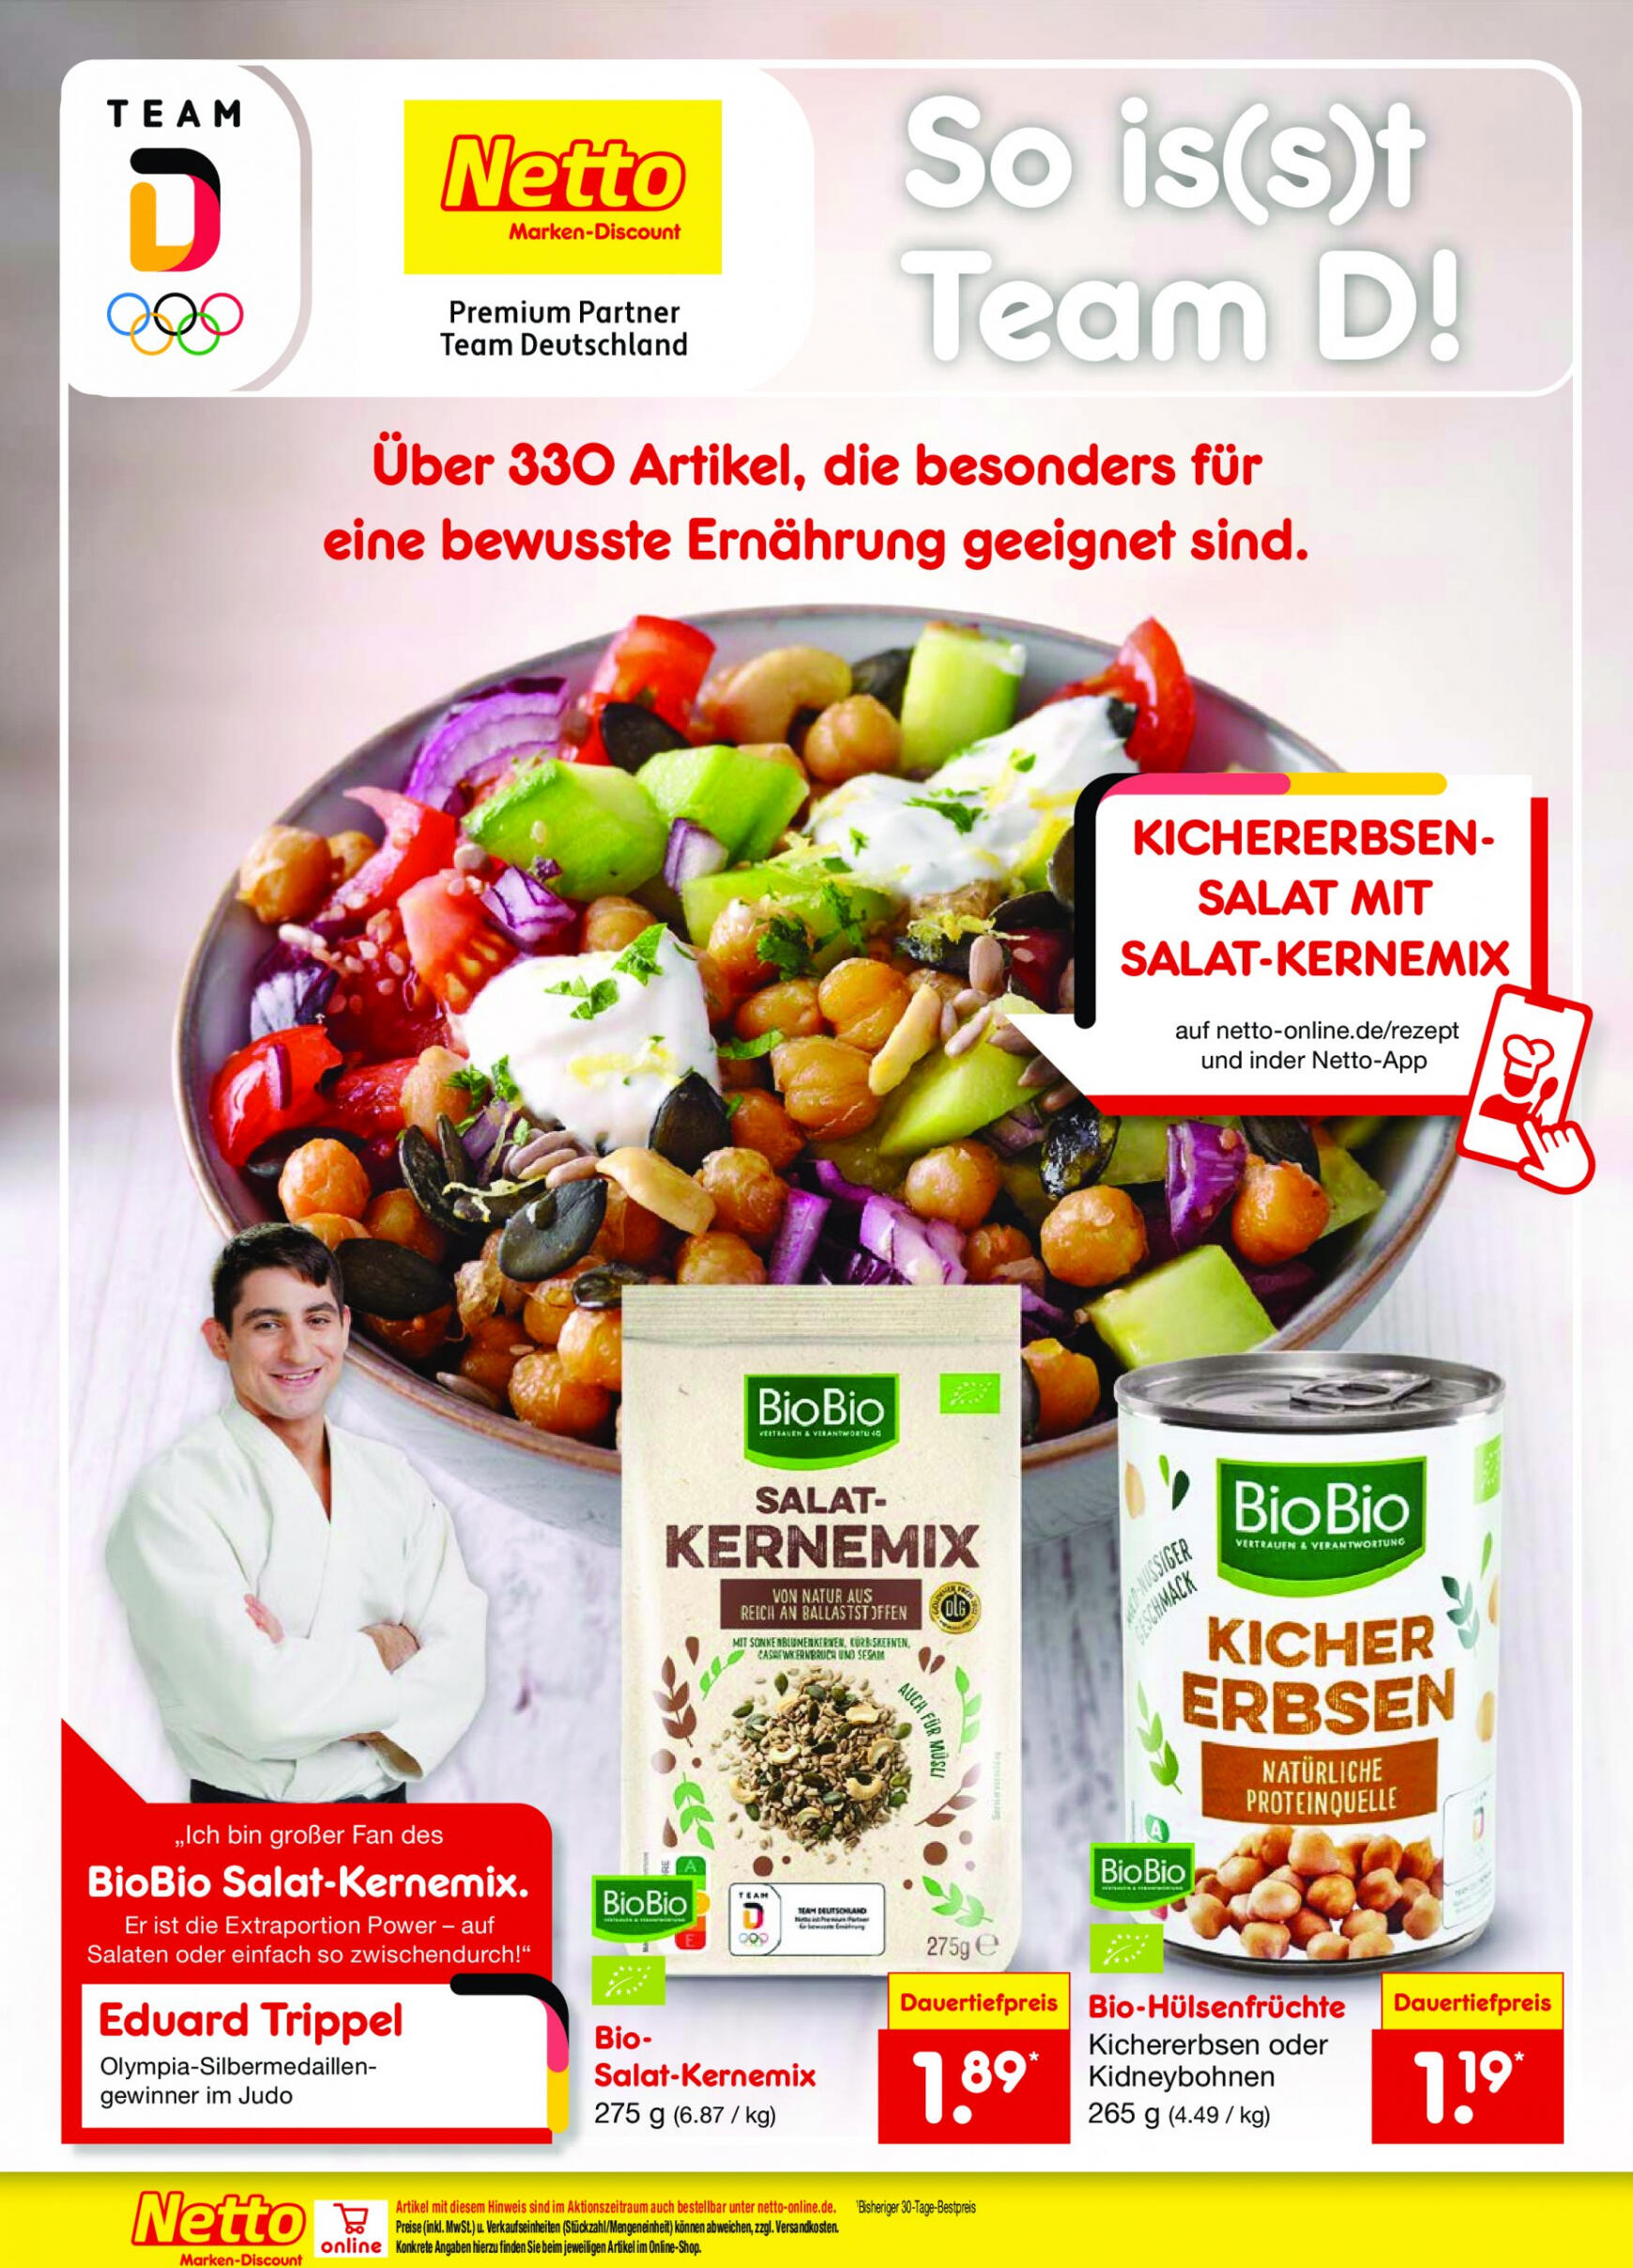 netto - Flyer Netto aktuell 22.04. - 27.04. - page: 51